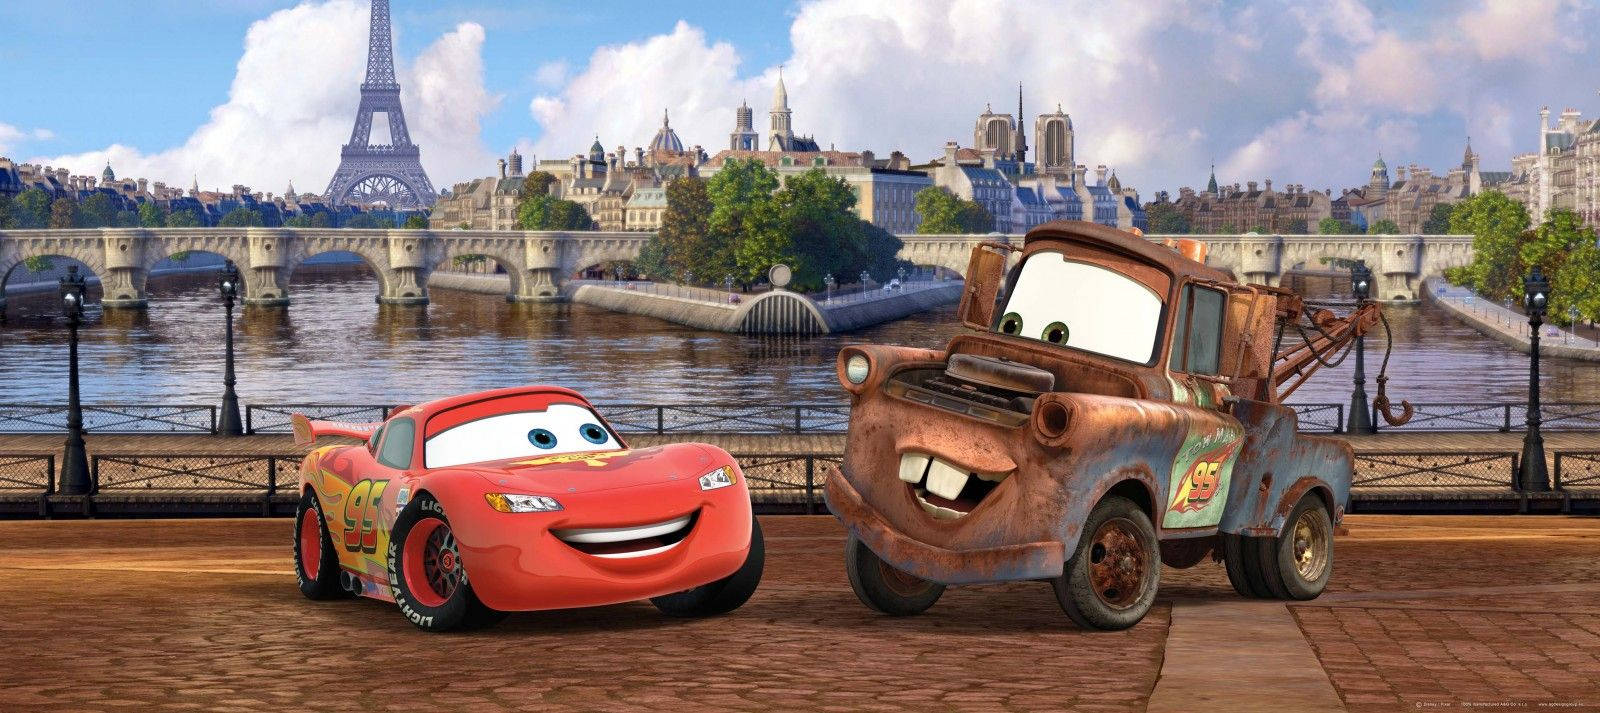 Lightning And Mater In Paris Cars 2 Wallpaper